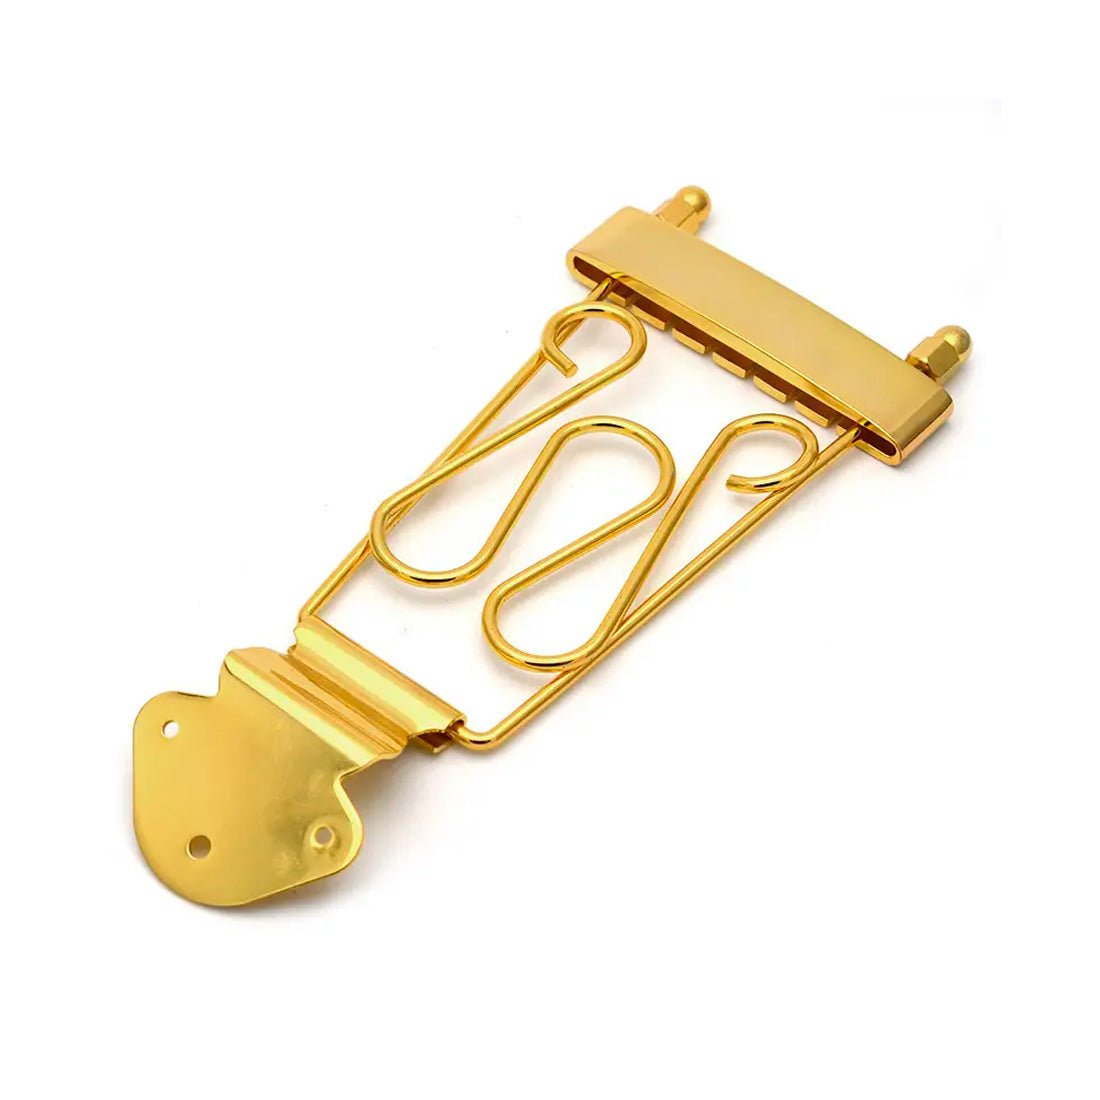 Archtop Wire Frame Tailpiece (Gold) - Parts - WM Guitars